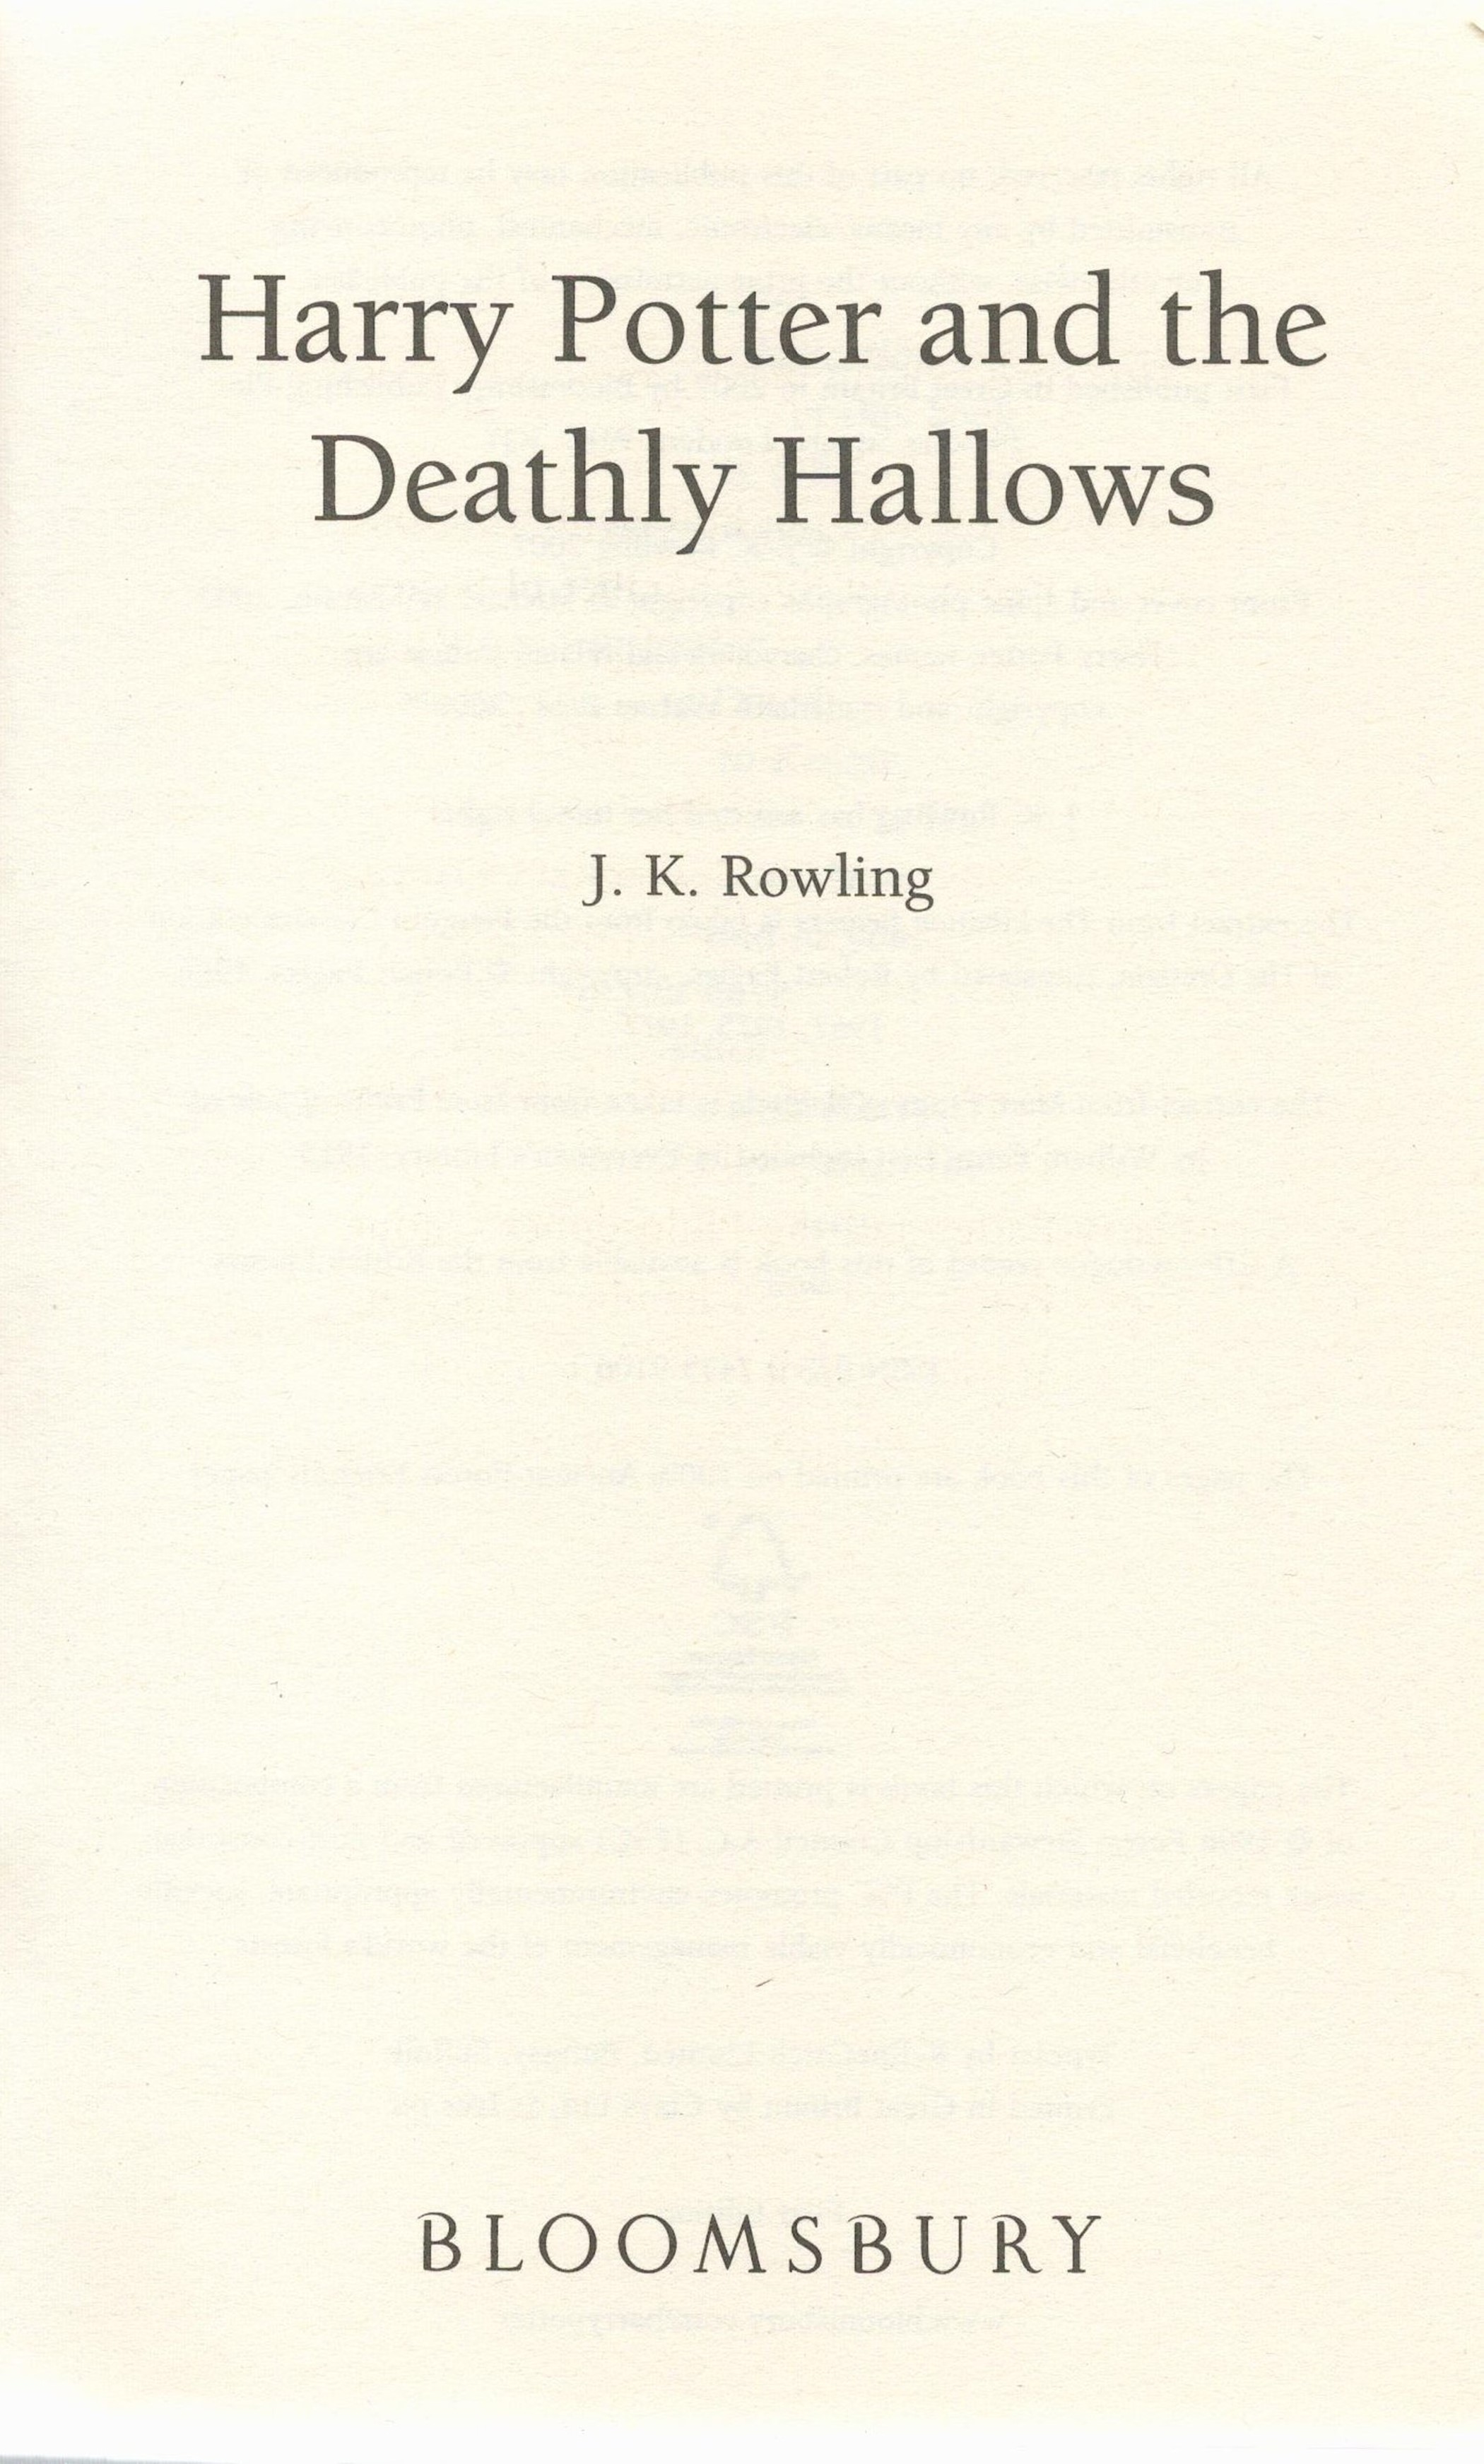 Harry Potter and the Deathly Hallows by J K Rowling First Edition 2007 Hardback Book published by - Image 2 of 3